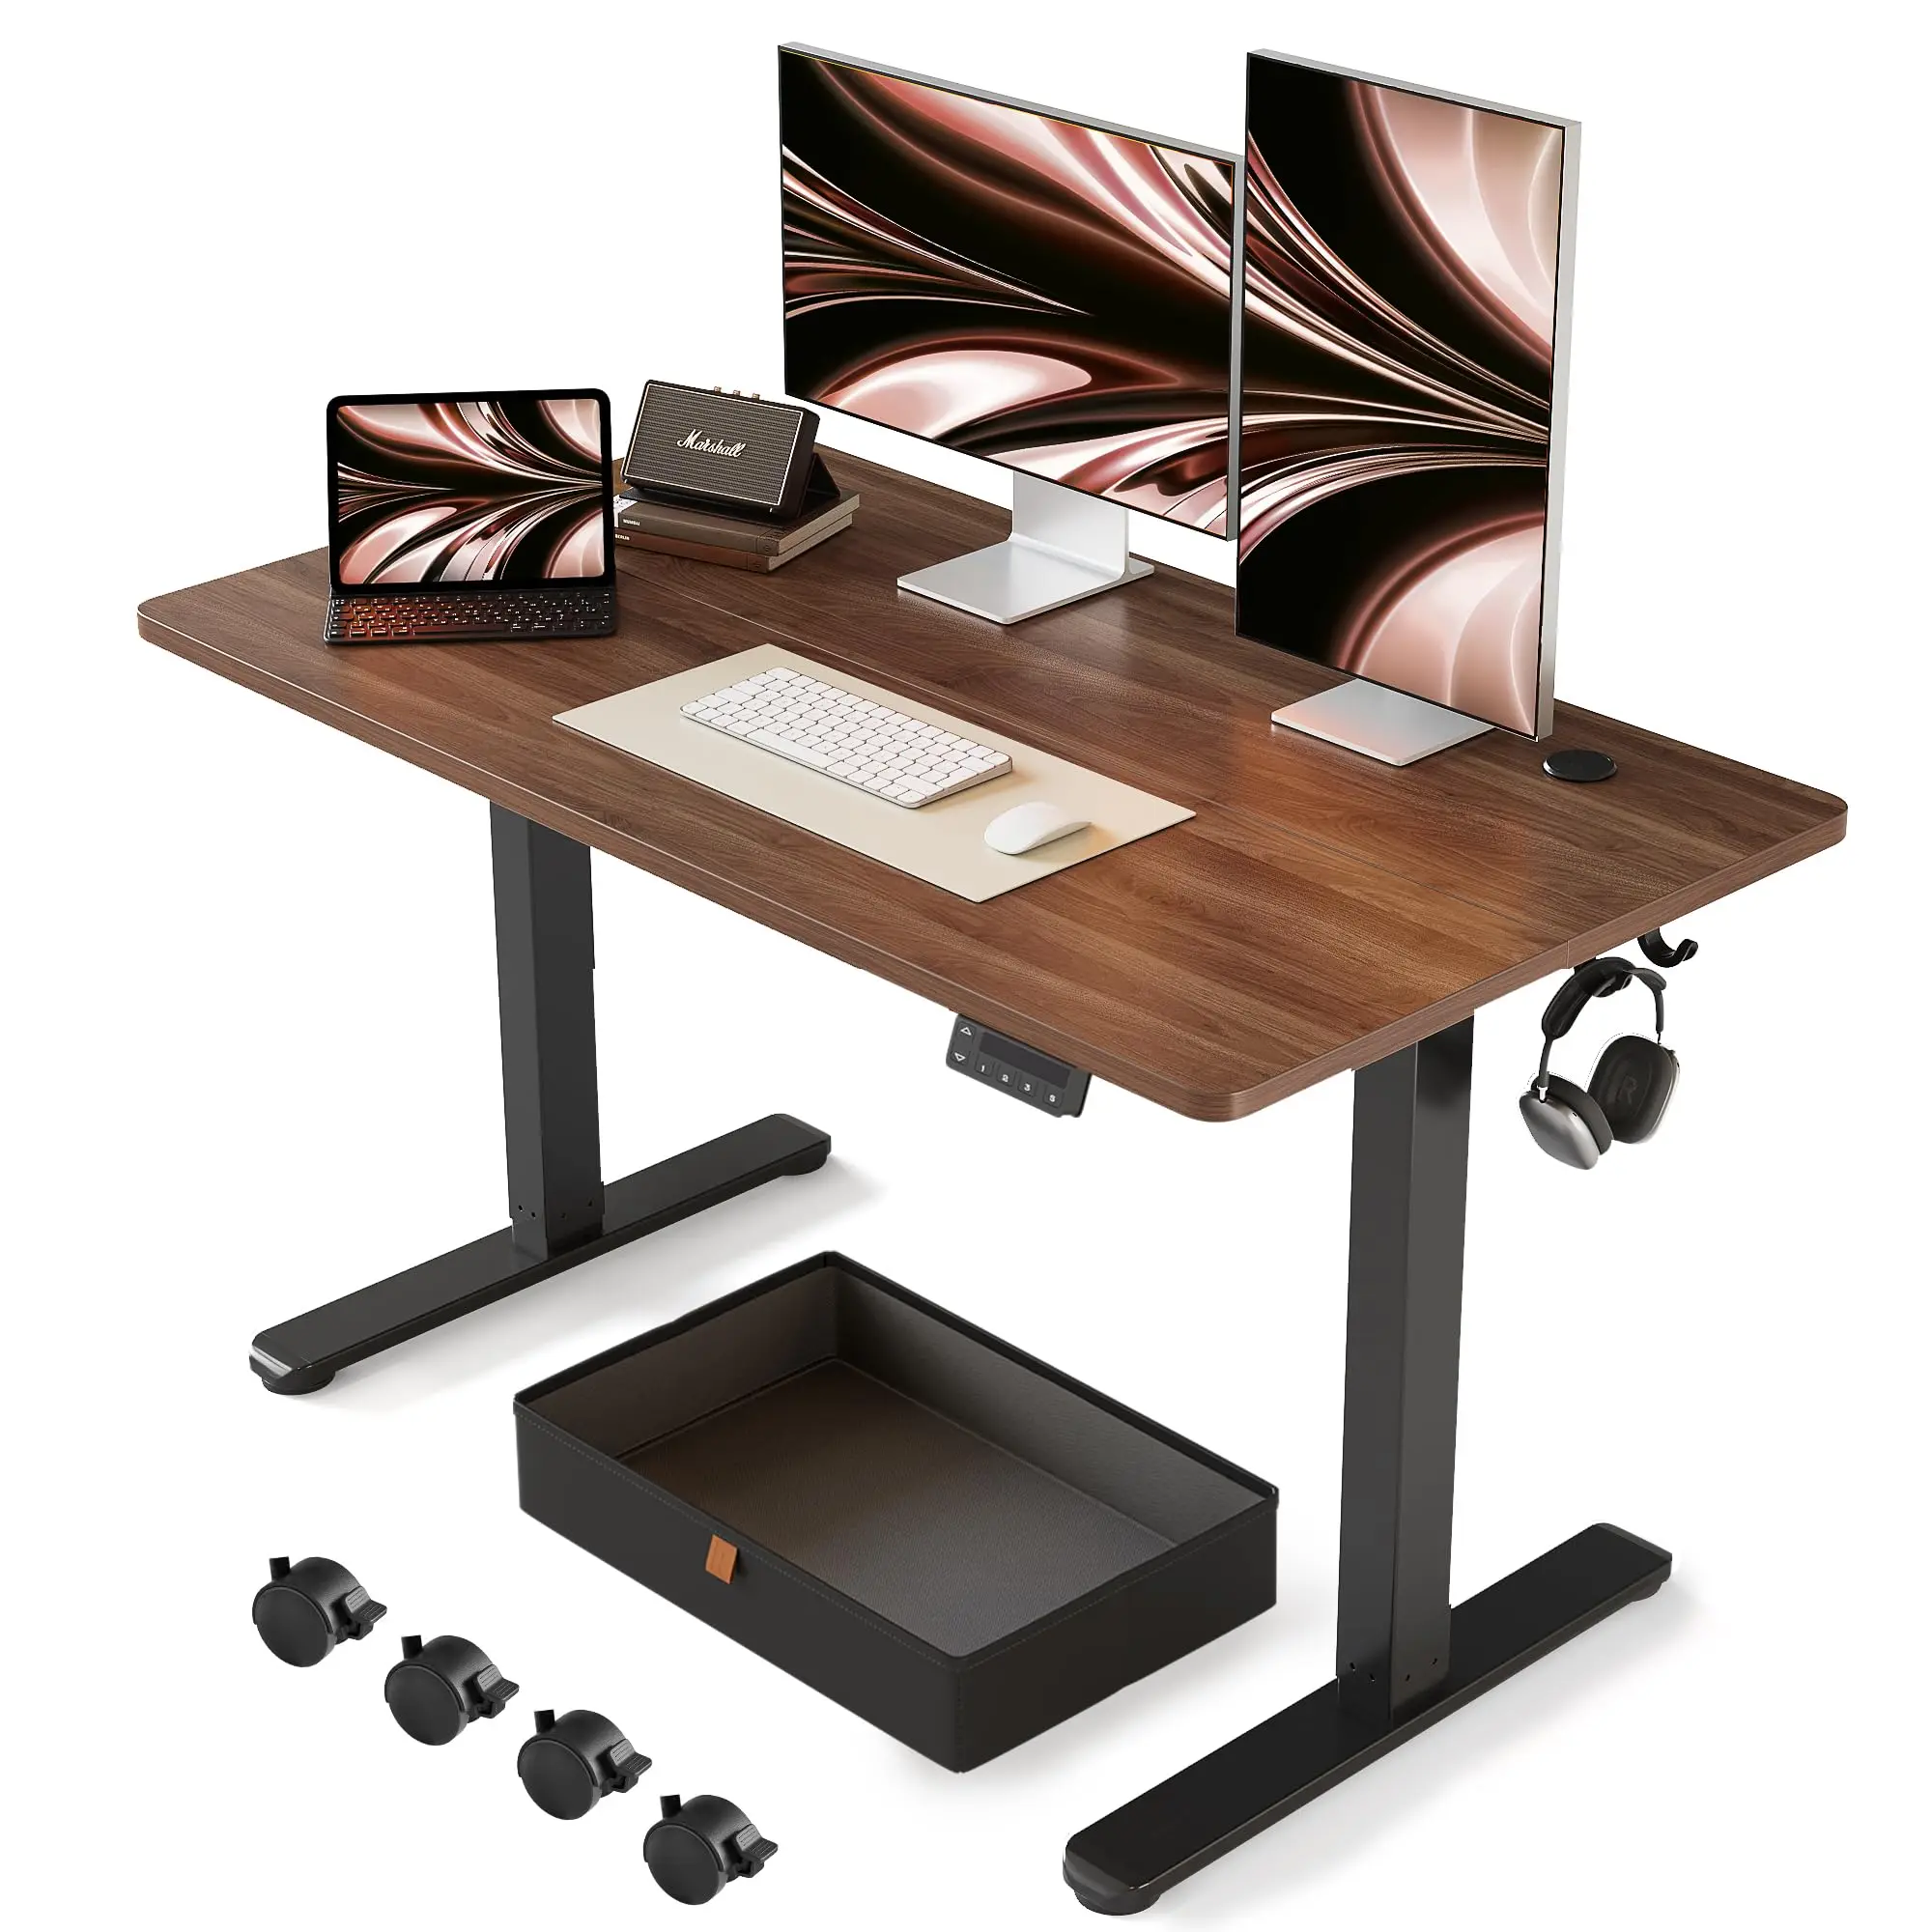 

FEZIBO 55 x 24 Inches Standing Desk with Drawer, Adjustable Height Electric Stand up Desk, Sit Stand Home Office Desk, Ergonomic